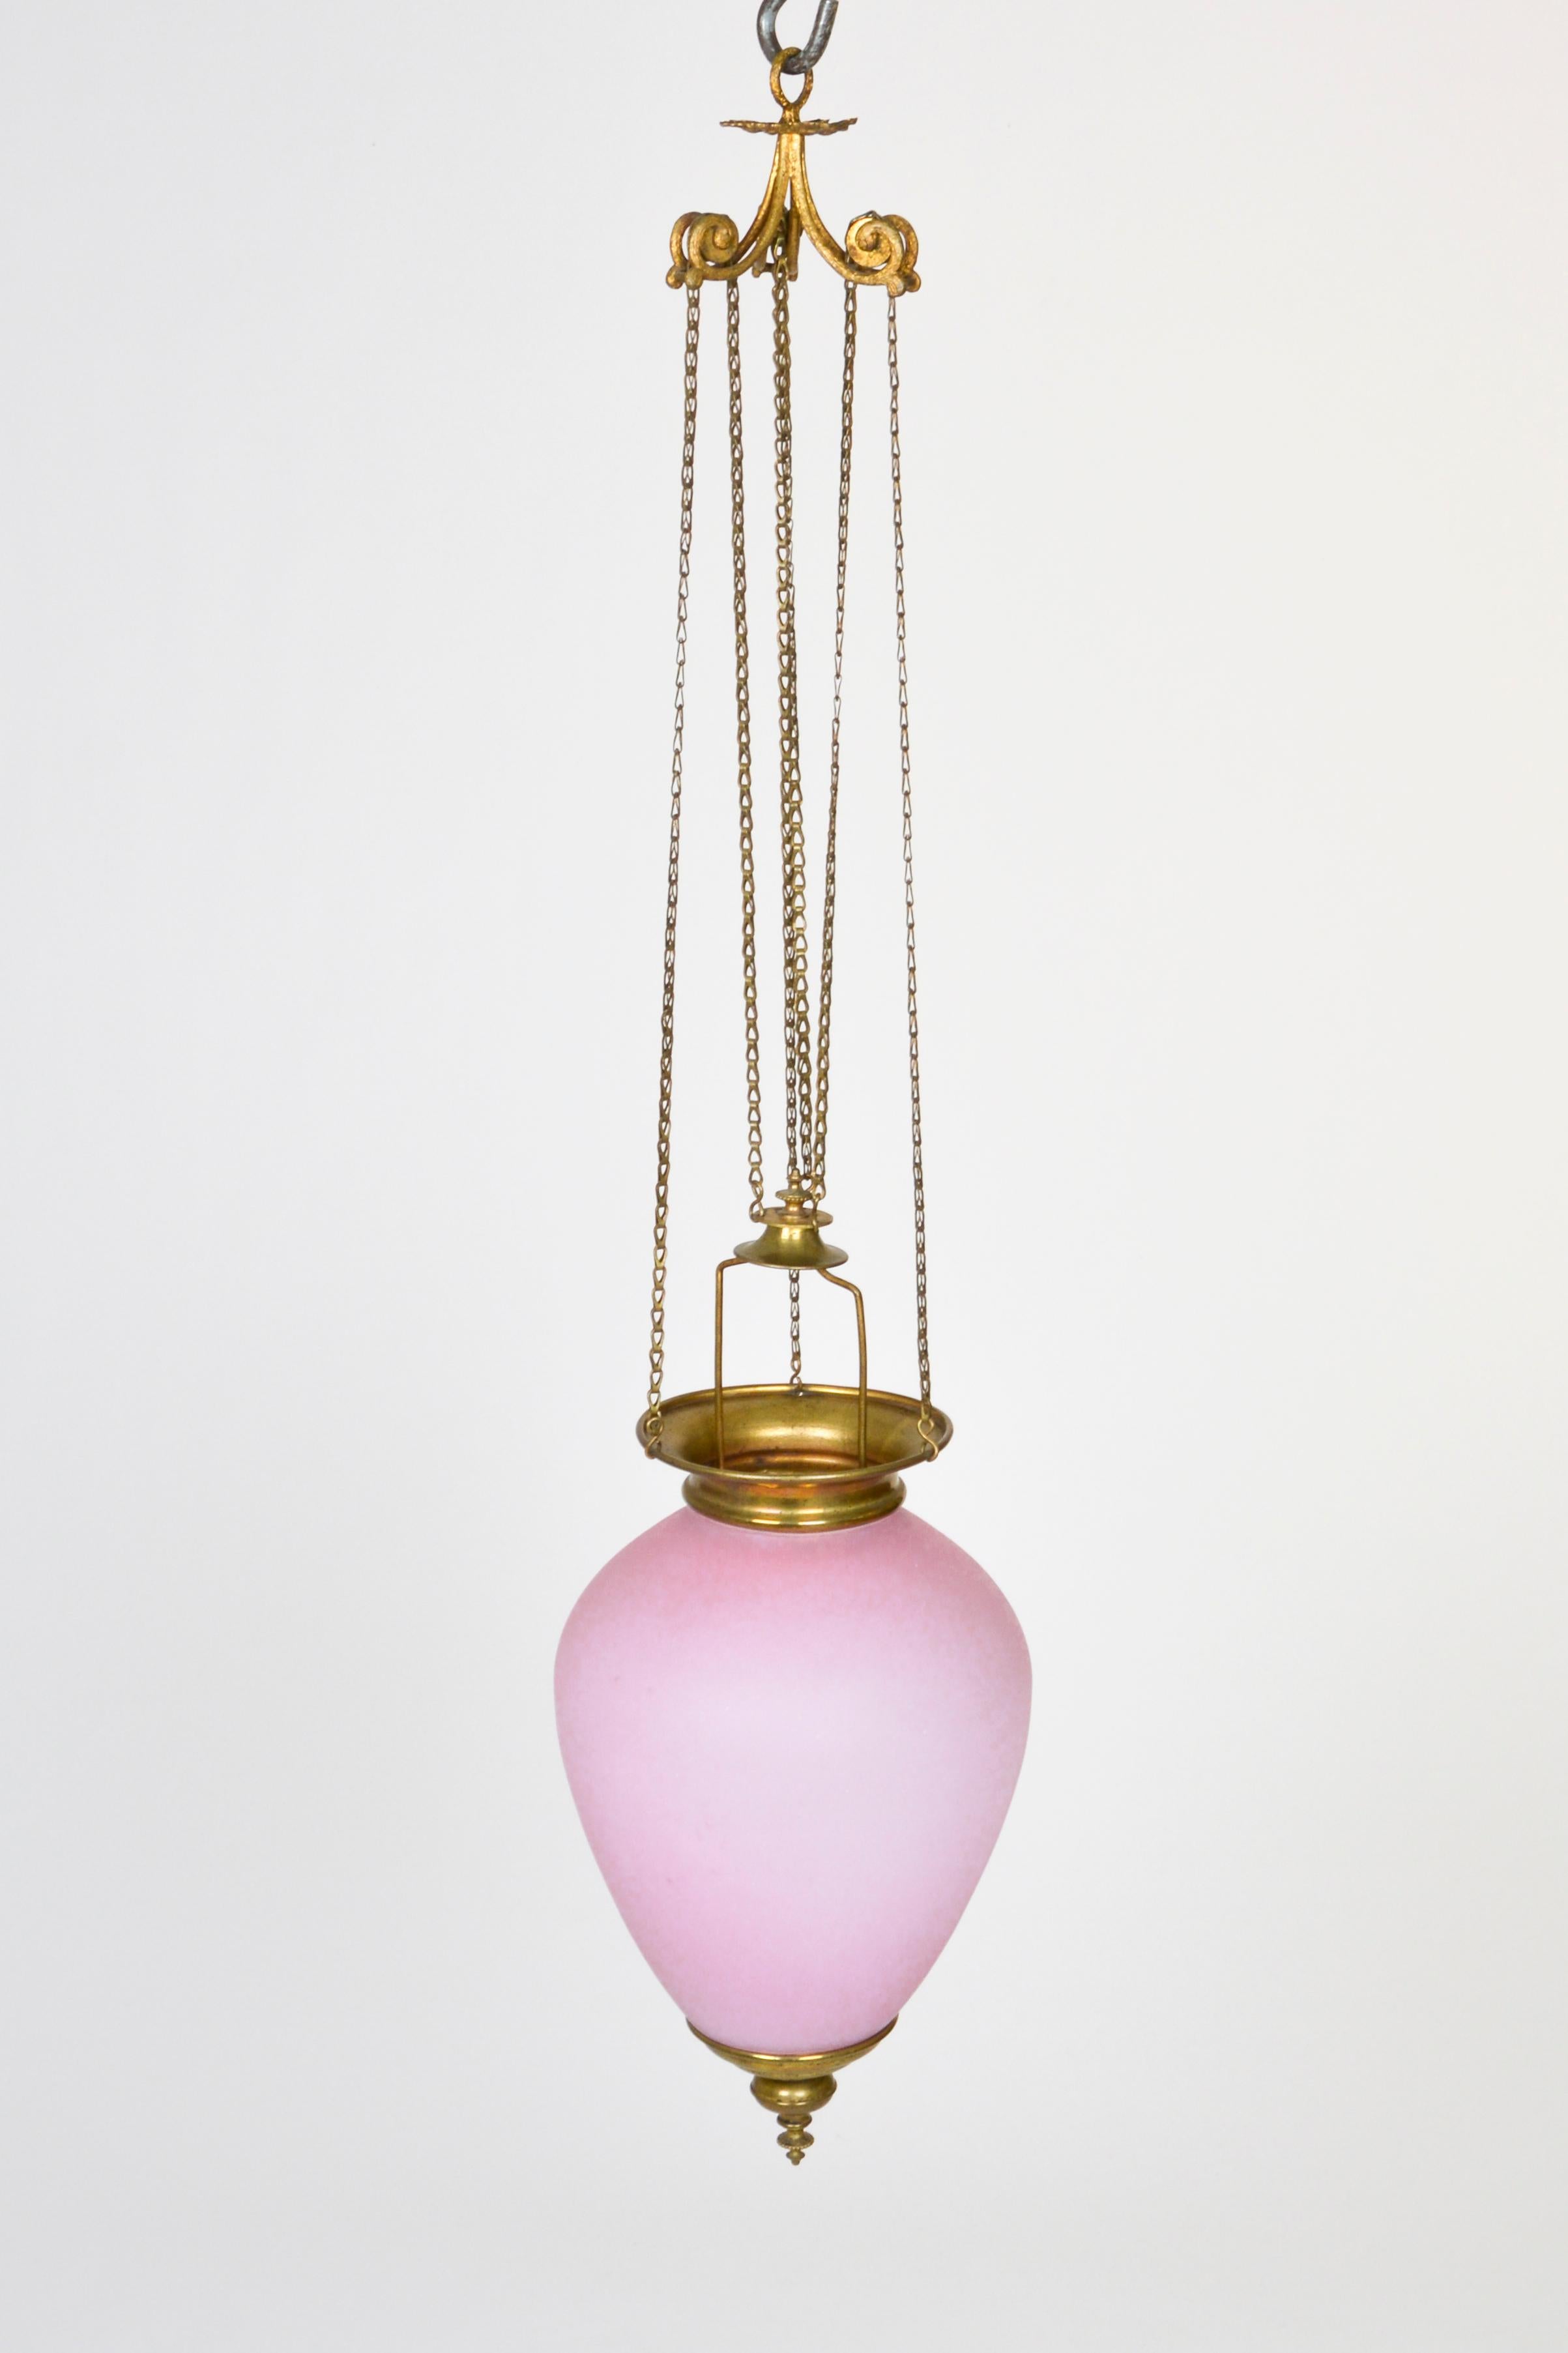 An elegant Biedermeier pendant of a pink milk glass vase. It is set in a pressed brass mounting and suspended from a functioning chain pulley mechanism.
Still in its original condition it is not electrified. It was made for a candle or individual